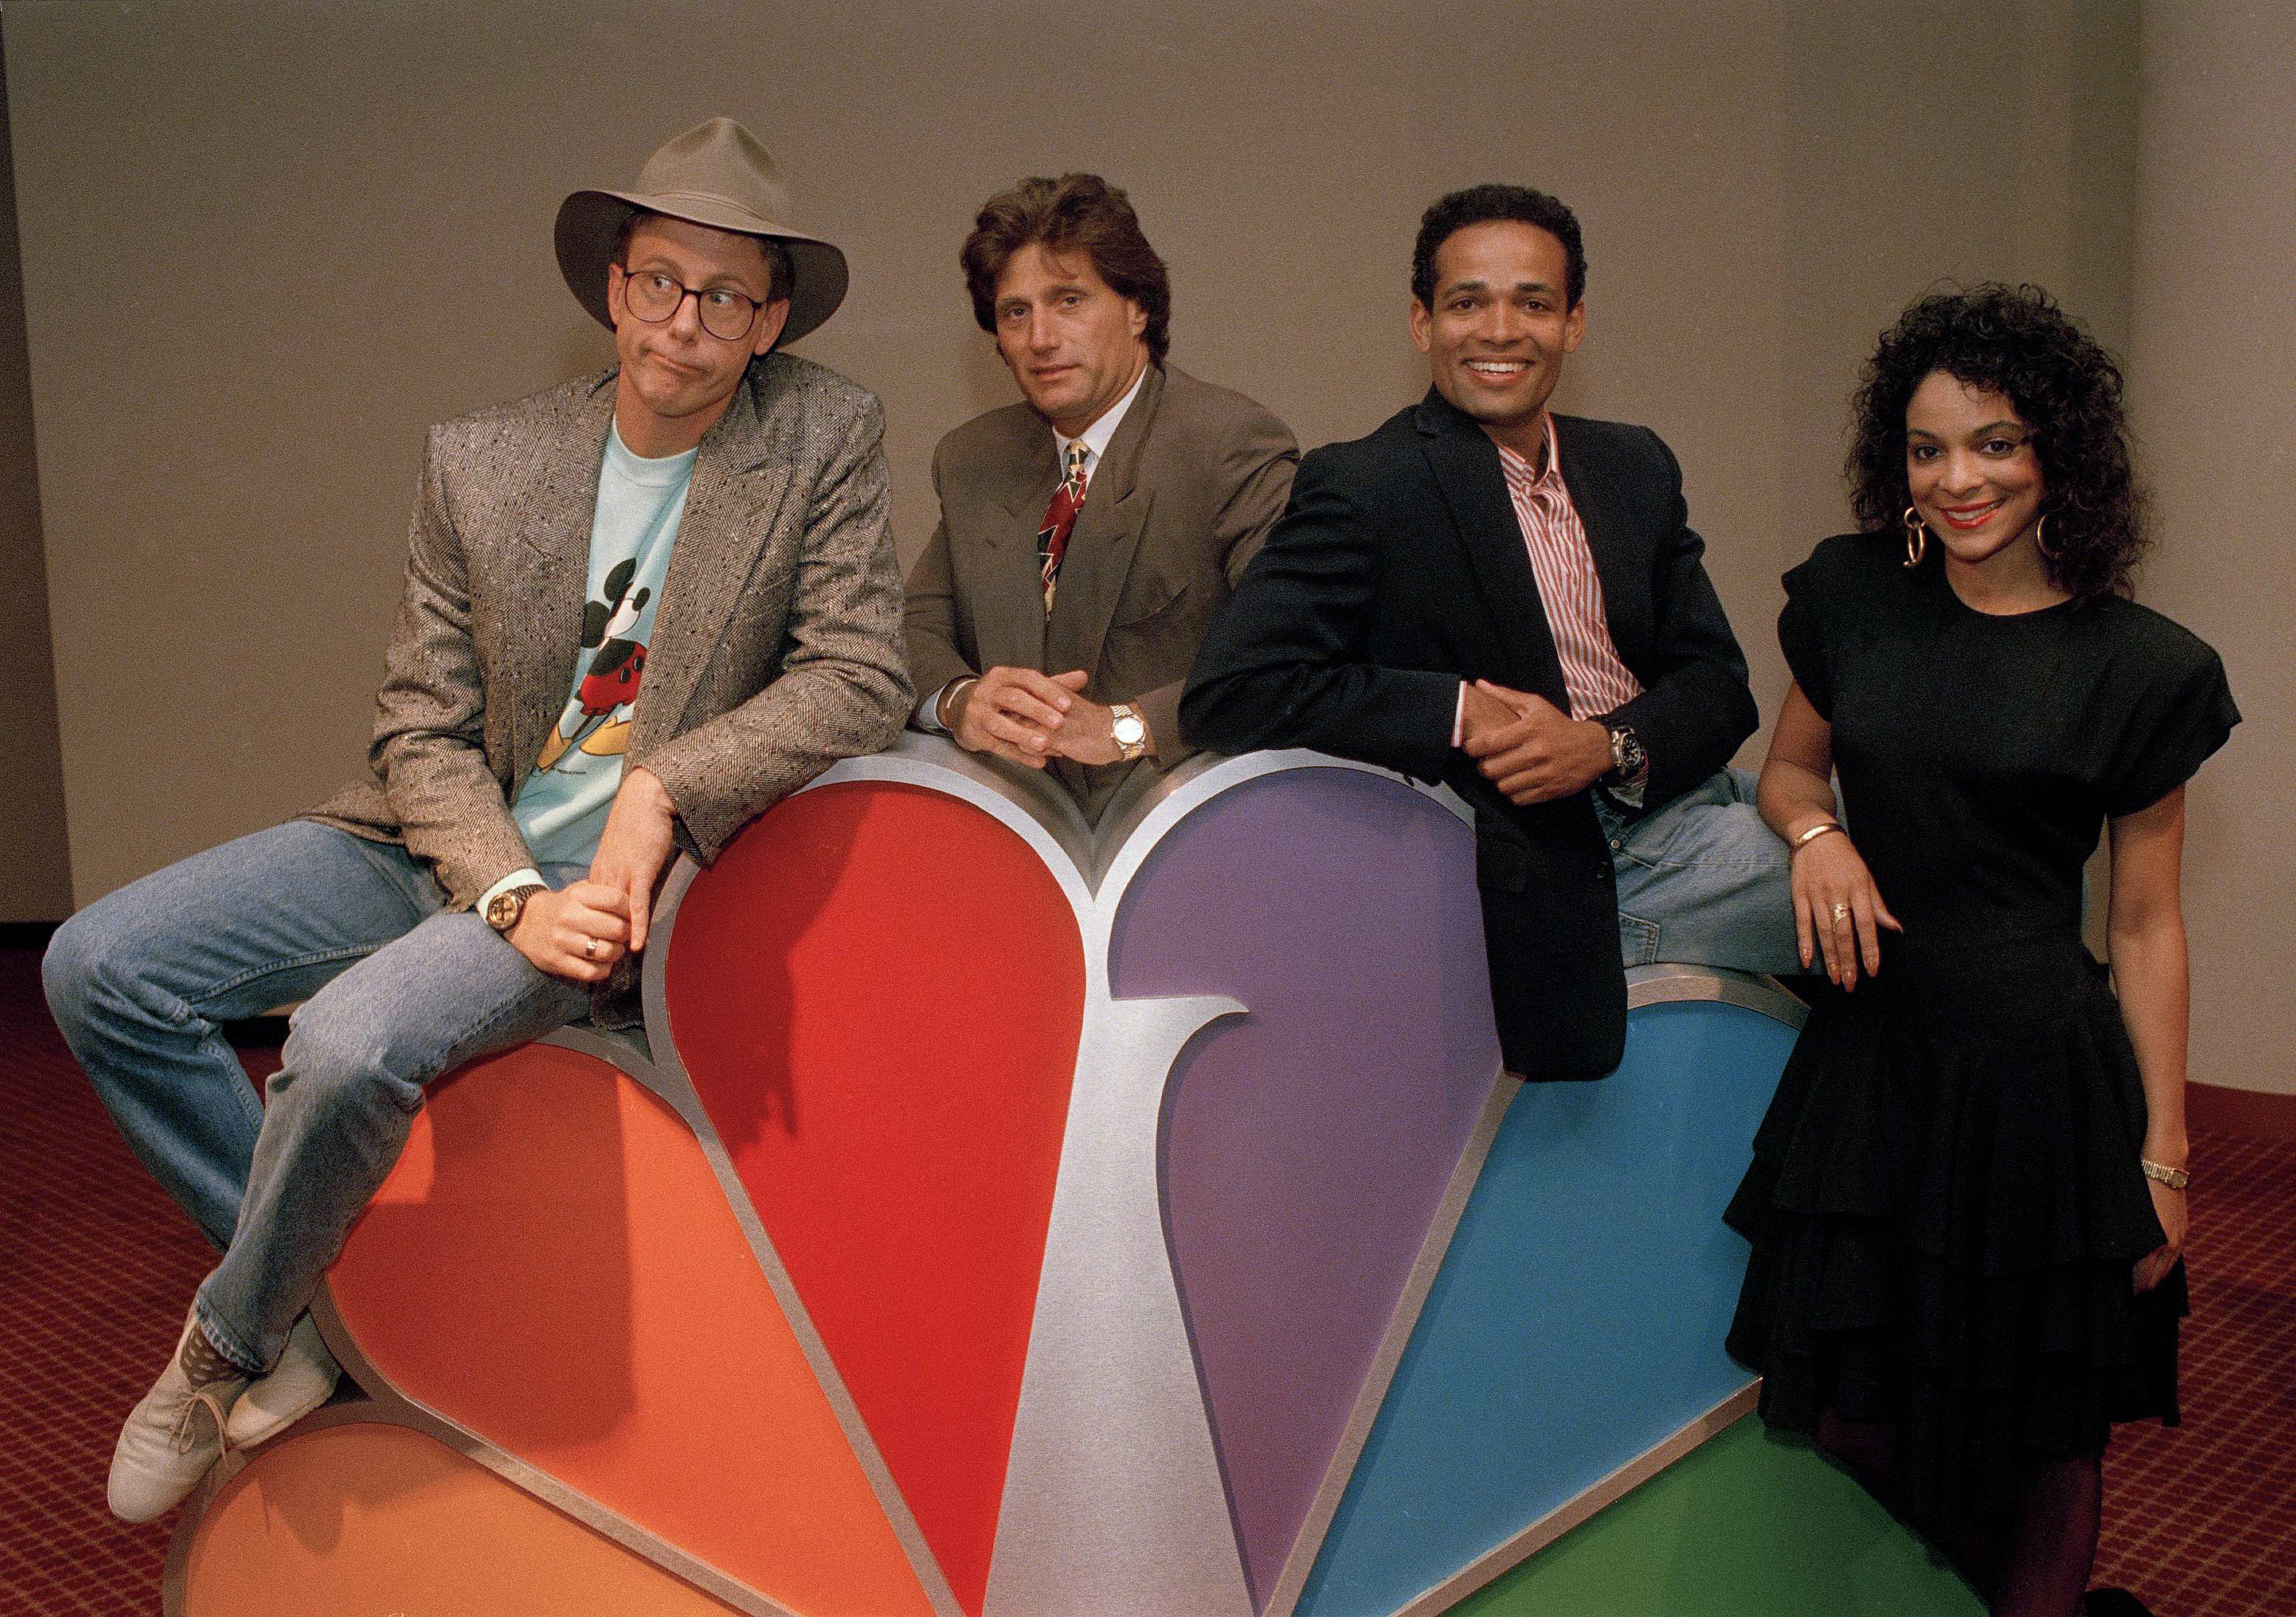 Harry Anderson, left, along with other NBC stars in 1988.